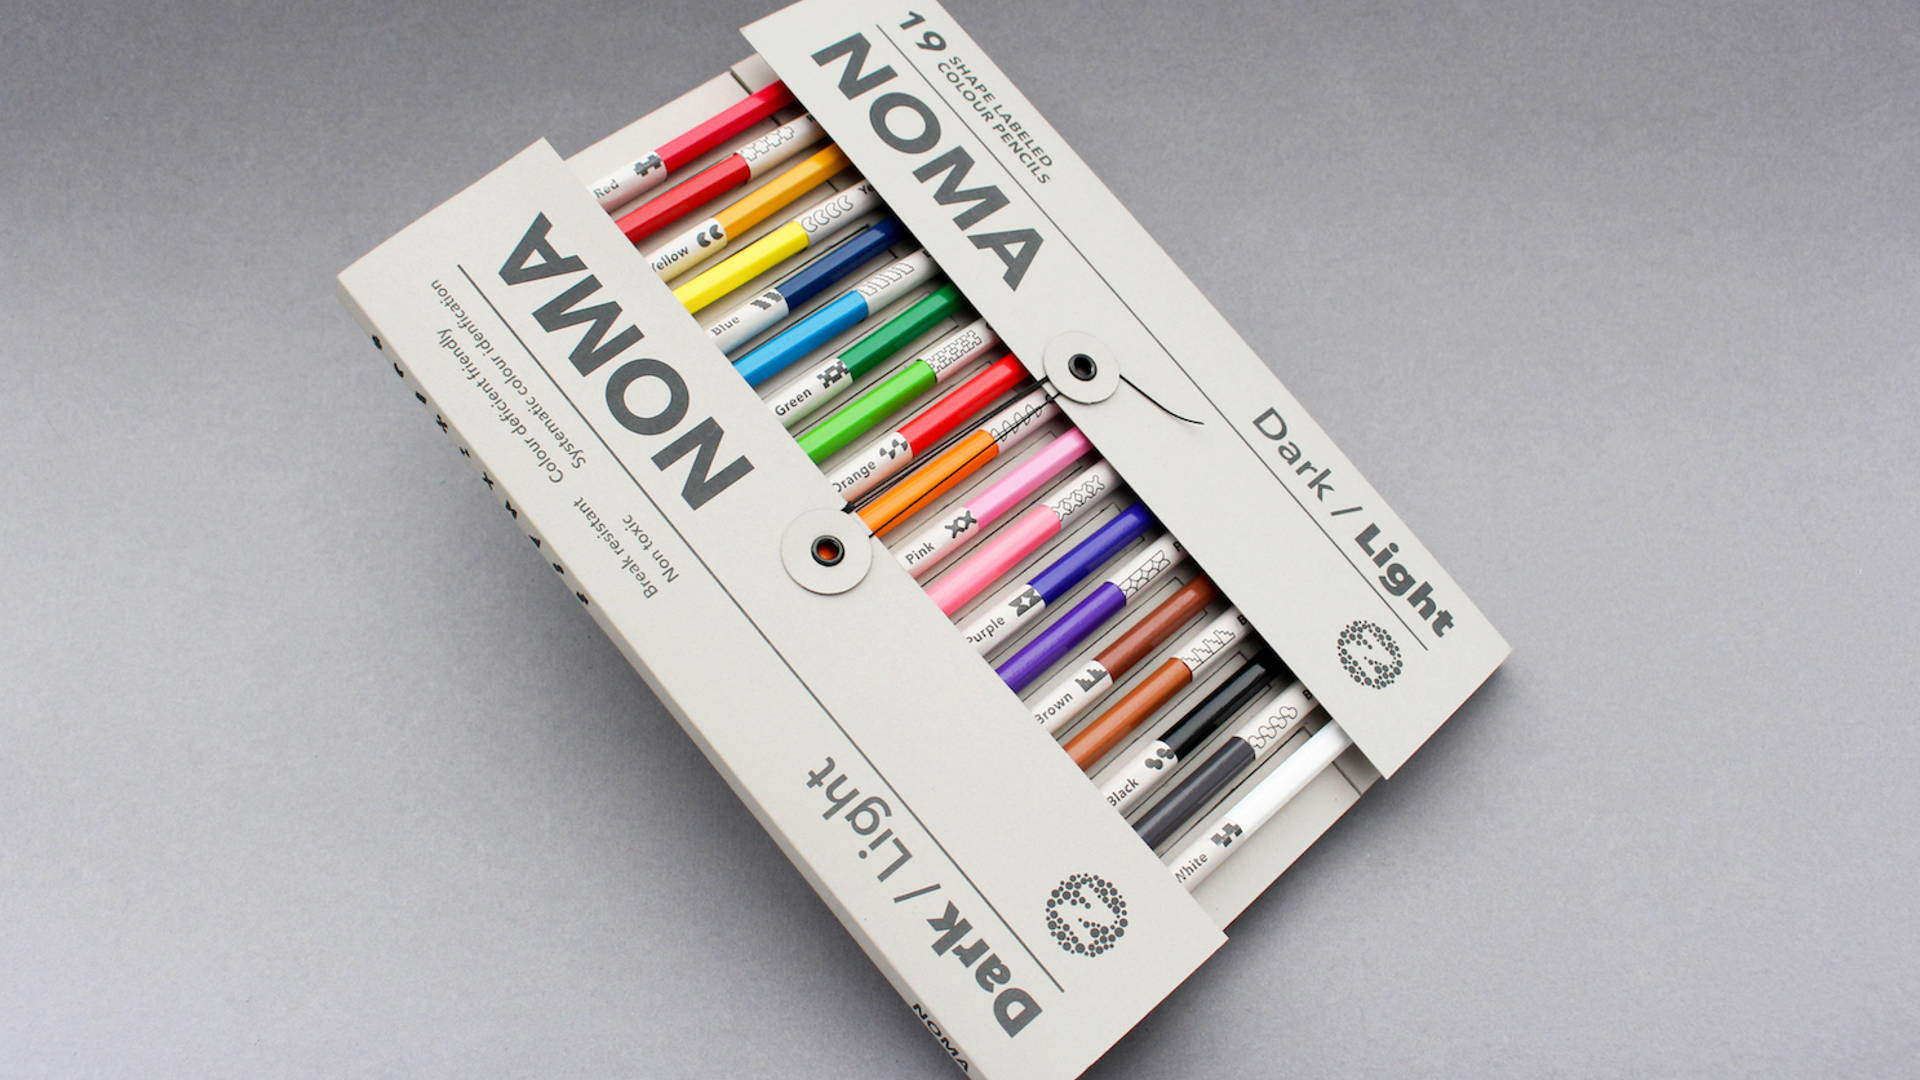 Featured image for This Concept Aims To Make Choosing a Colored Pencil Easier for Those Who Are Colorblind